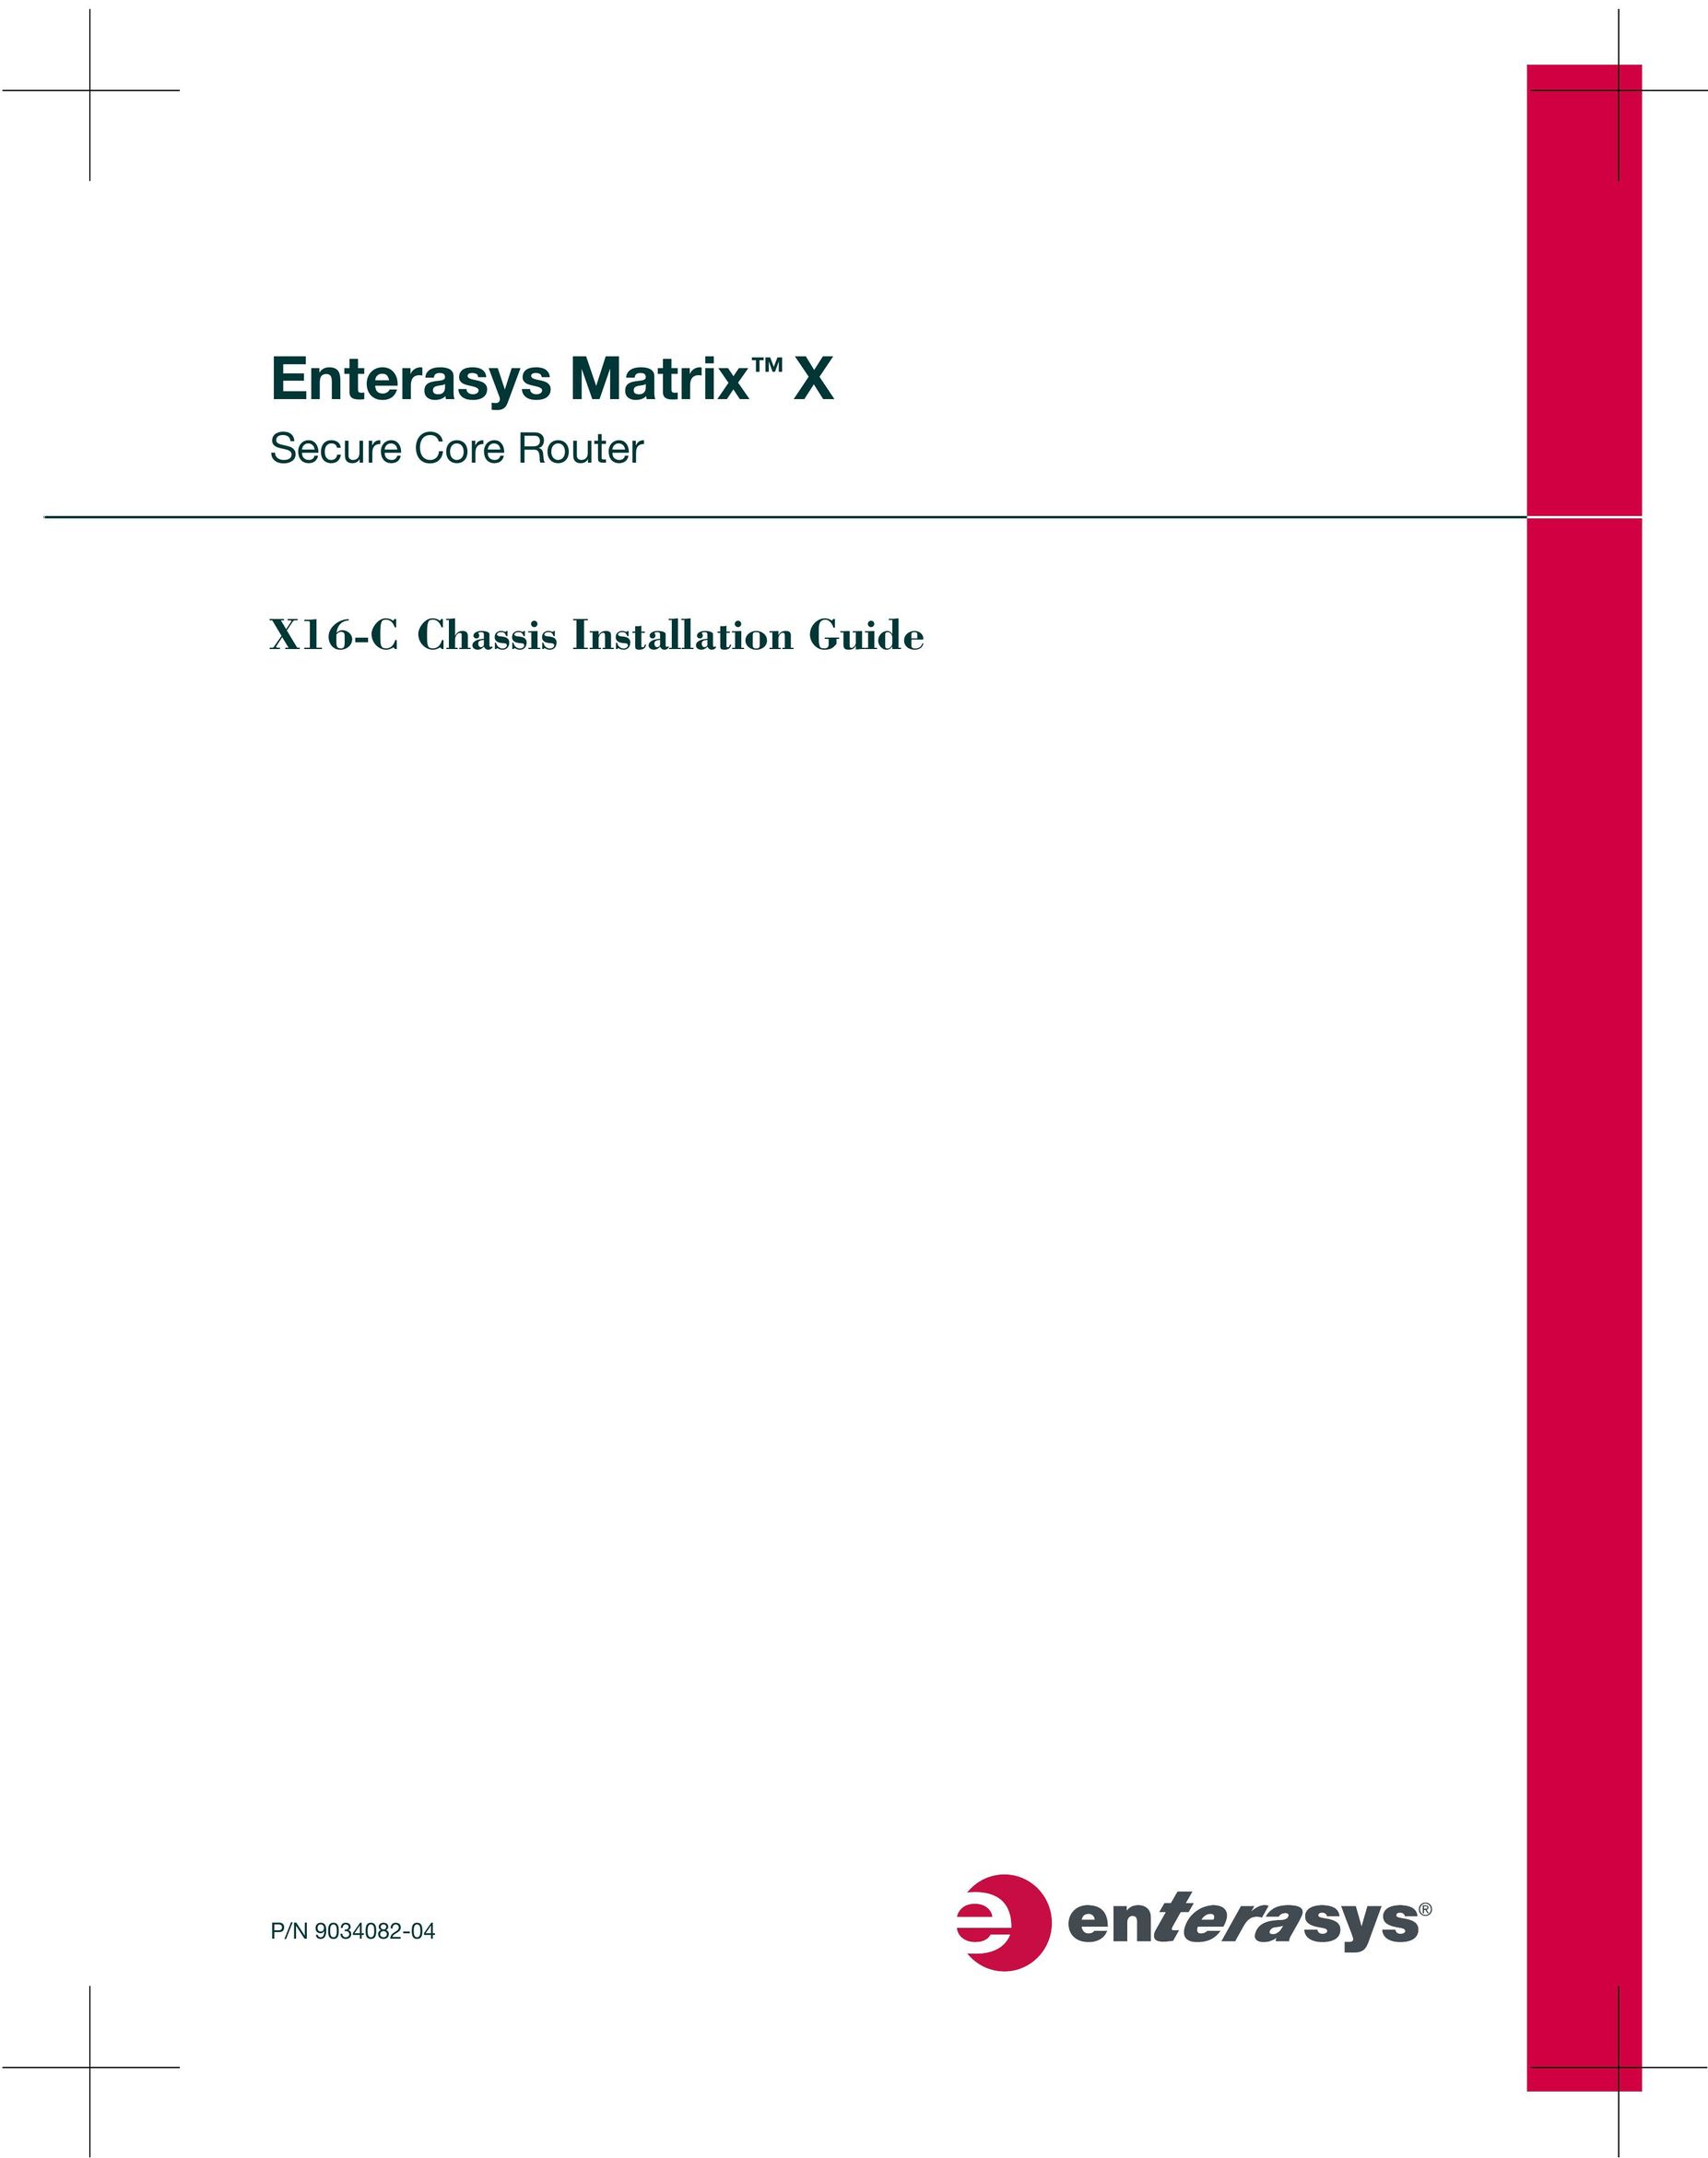 Enterasys Networks X16-C Network Router User Manual